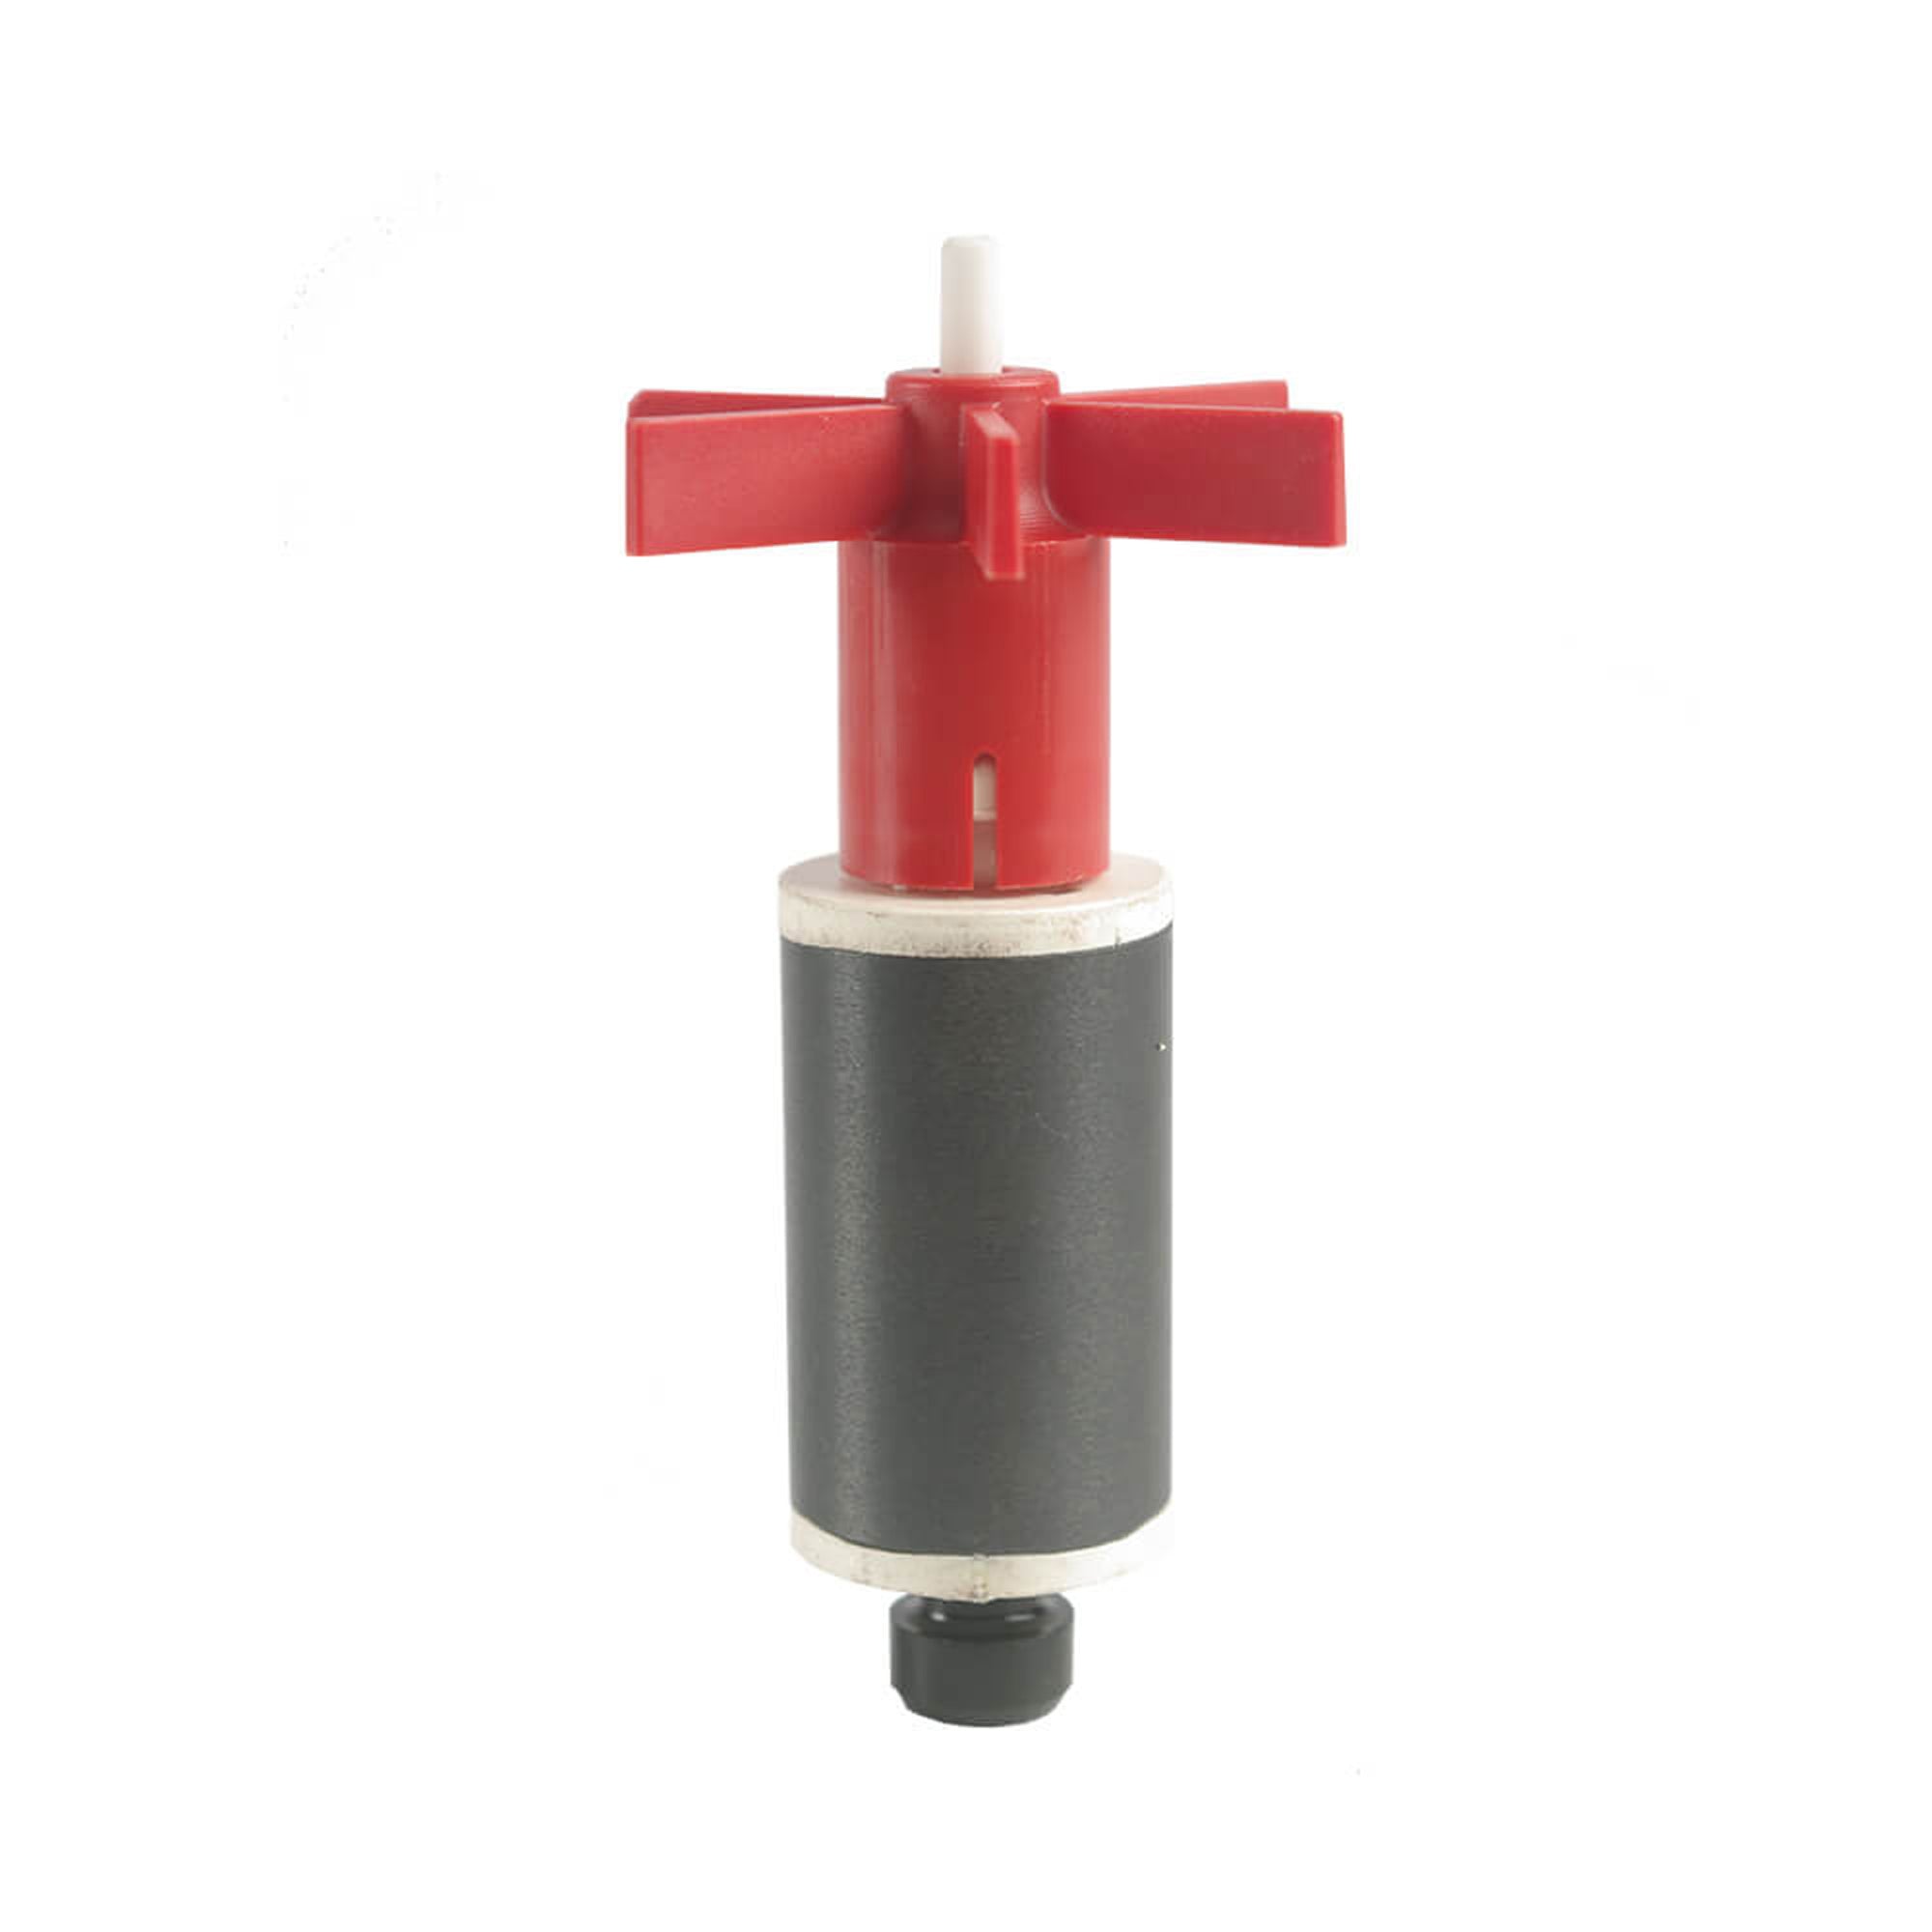 Fluval Replacement Magnetic Impeller with Ceramic Shaft & Rubber Bushing for 407 Filter